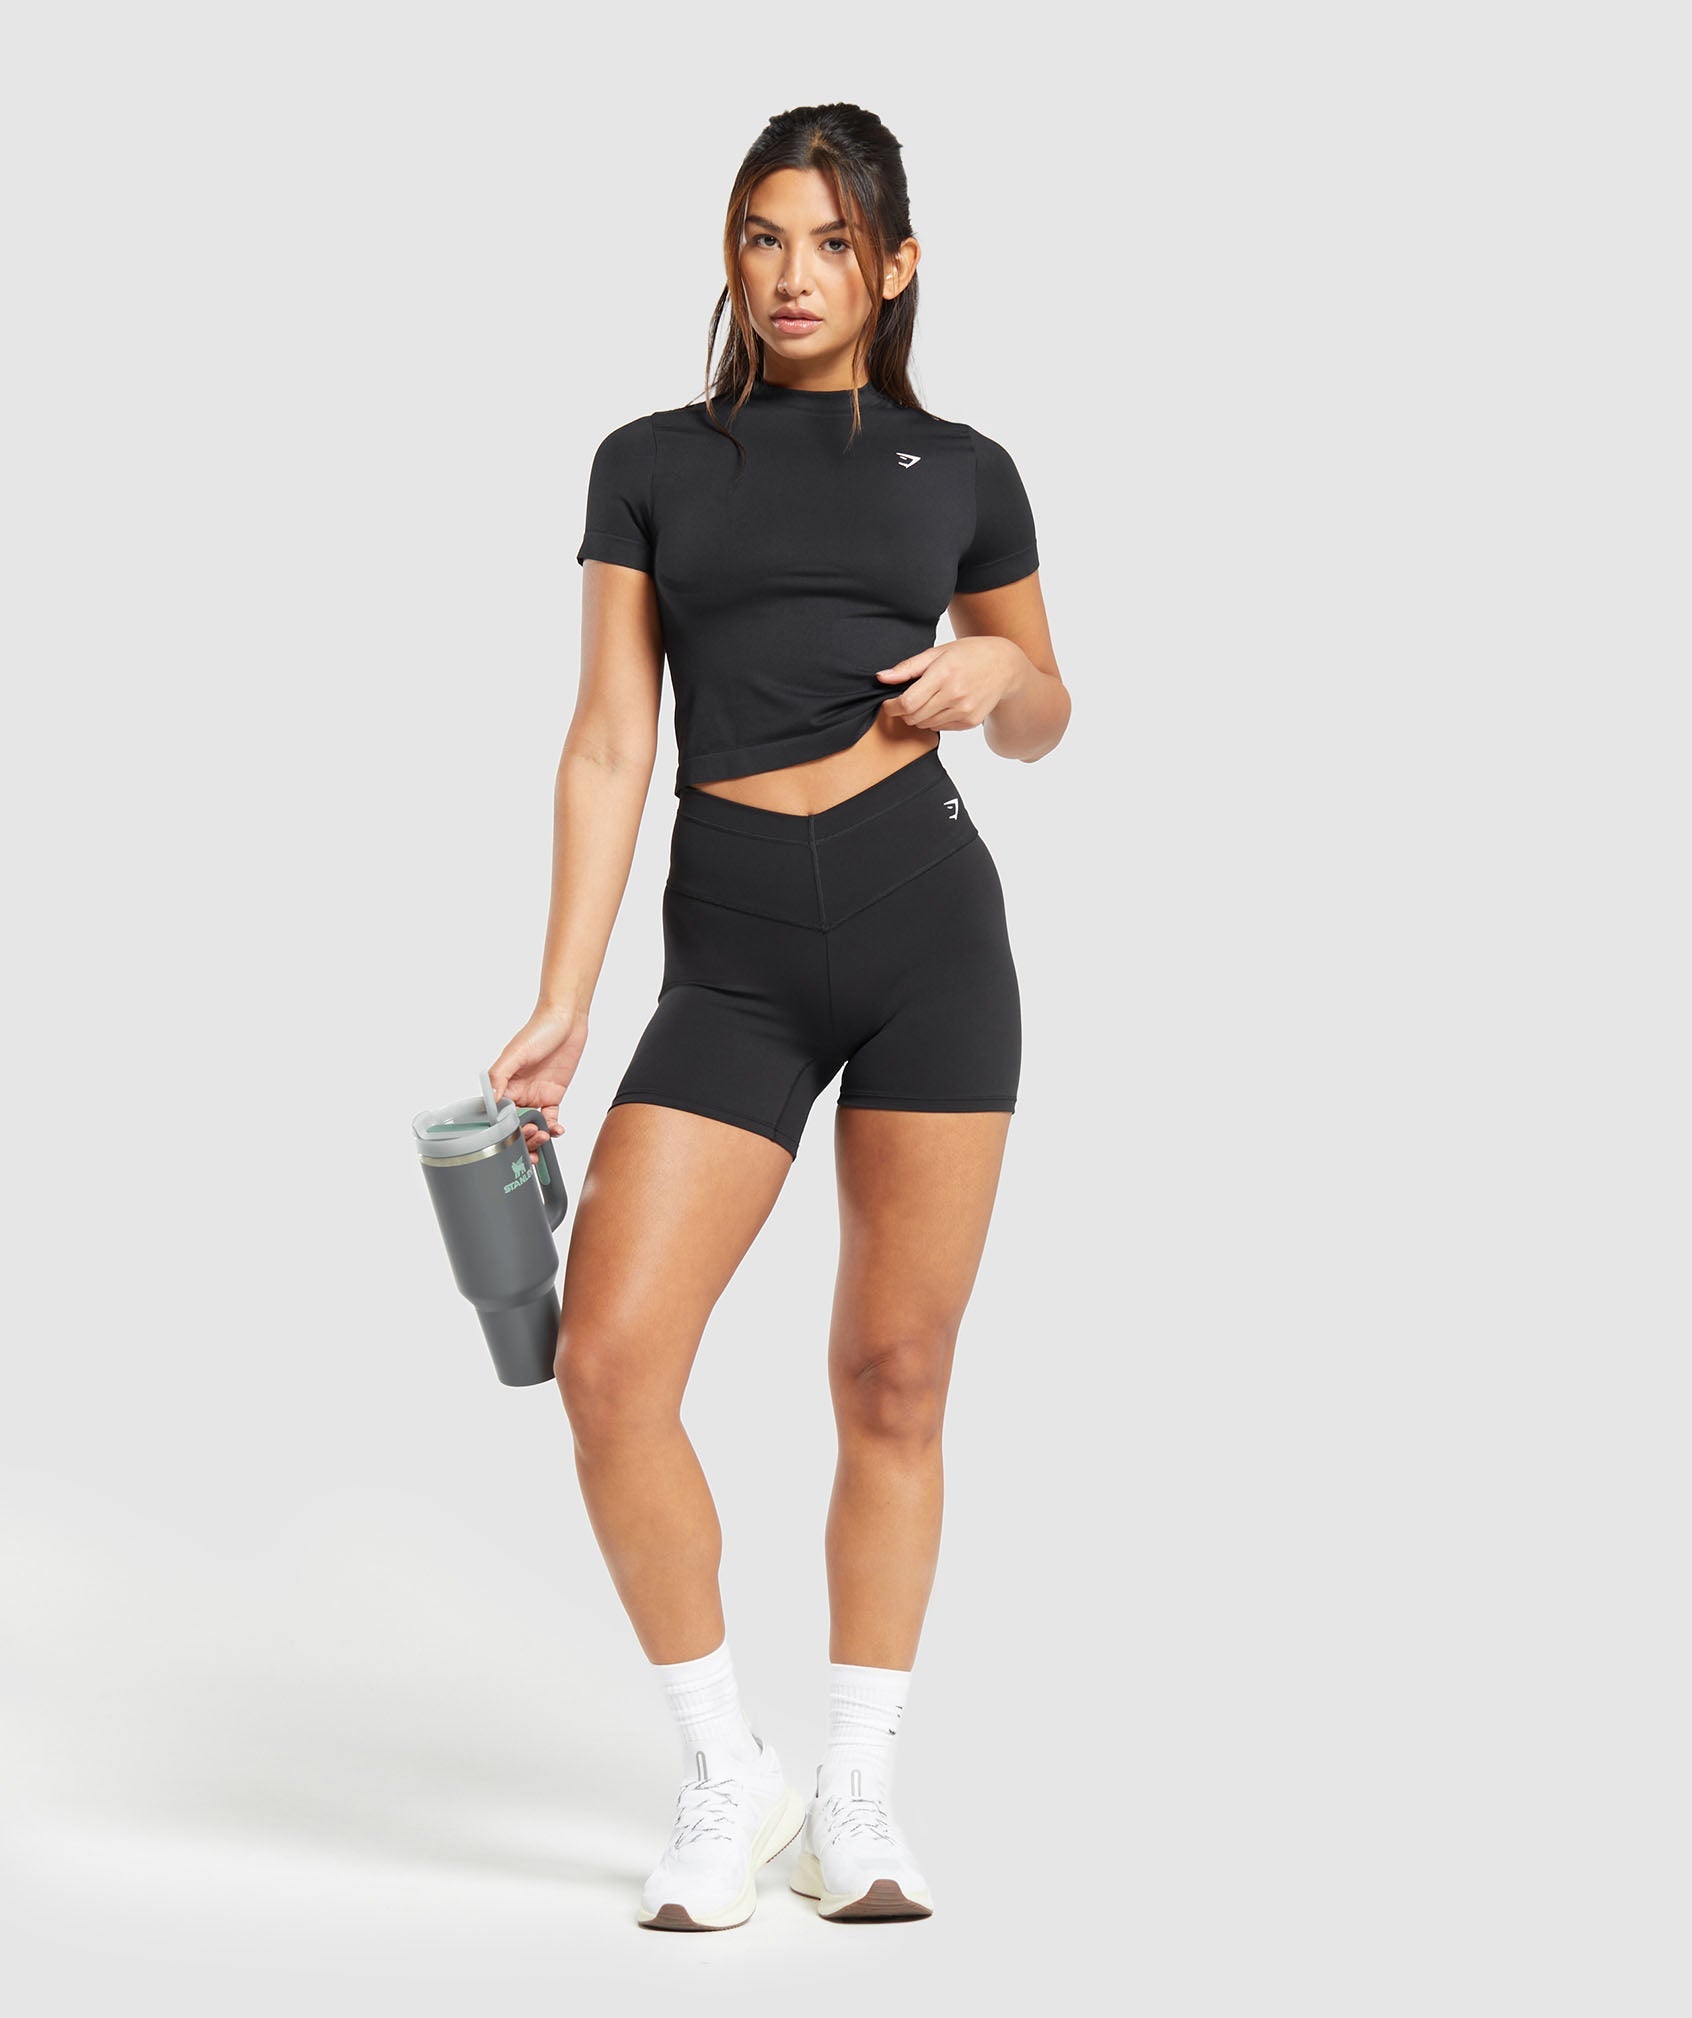 Everyday Seamless Tight Fit Tee in Black - view 4